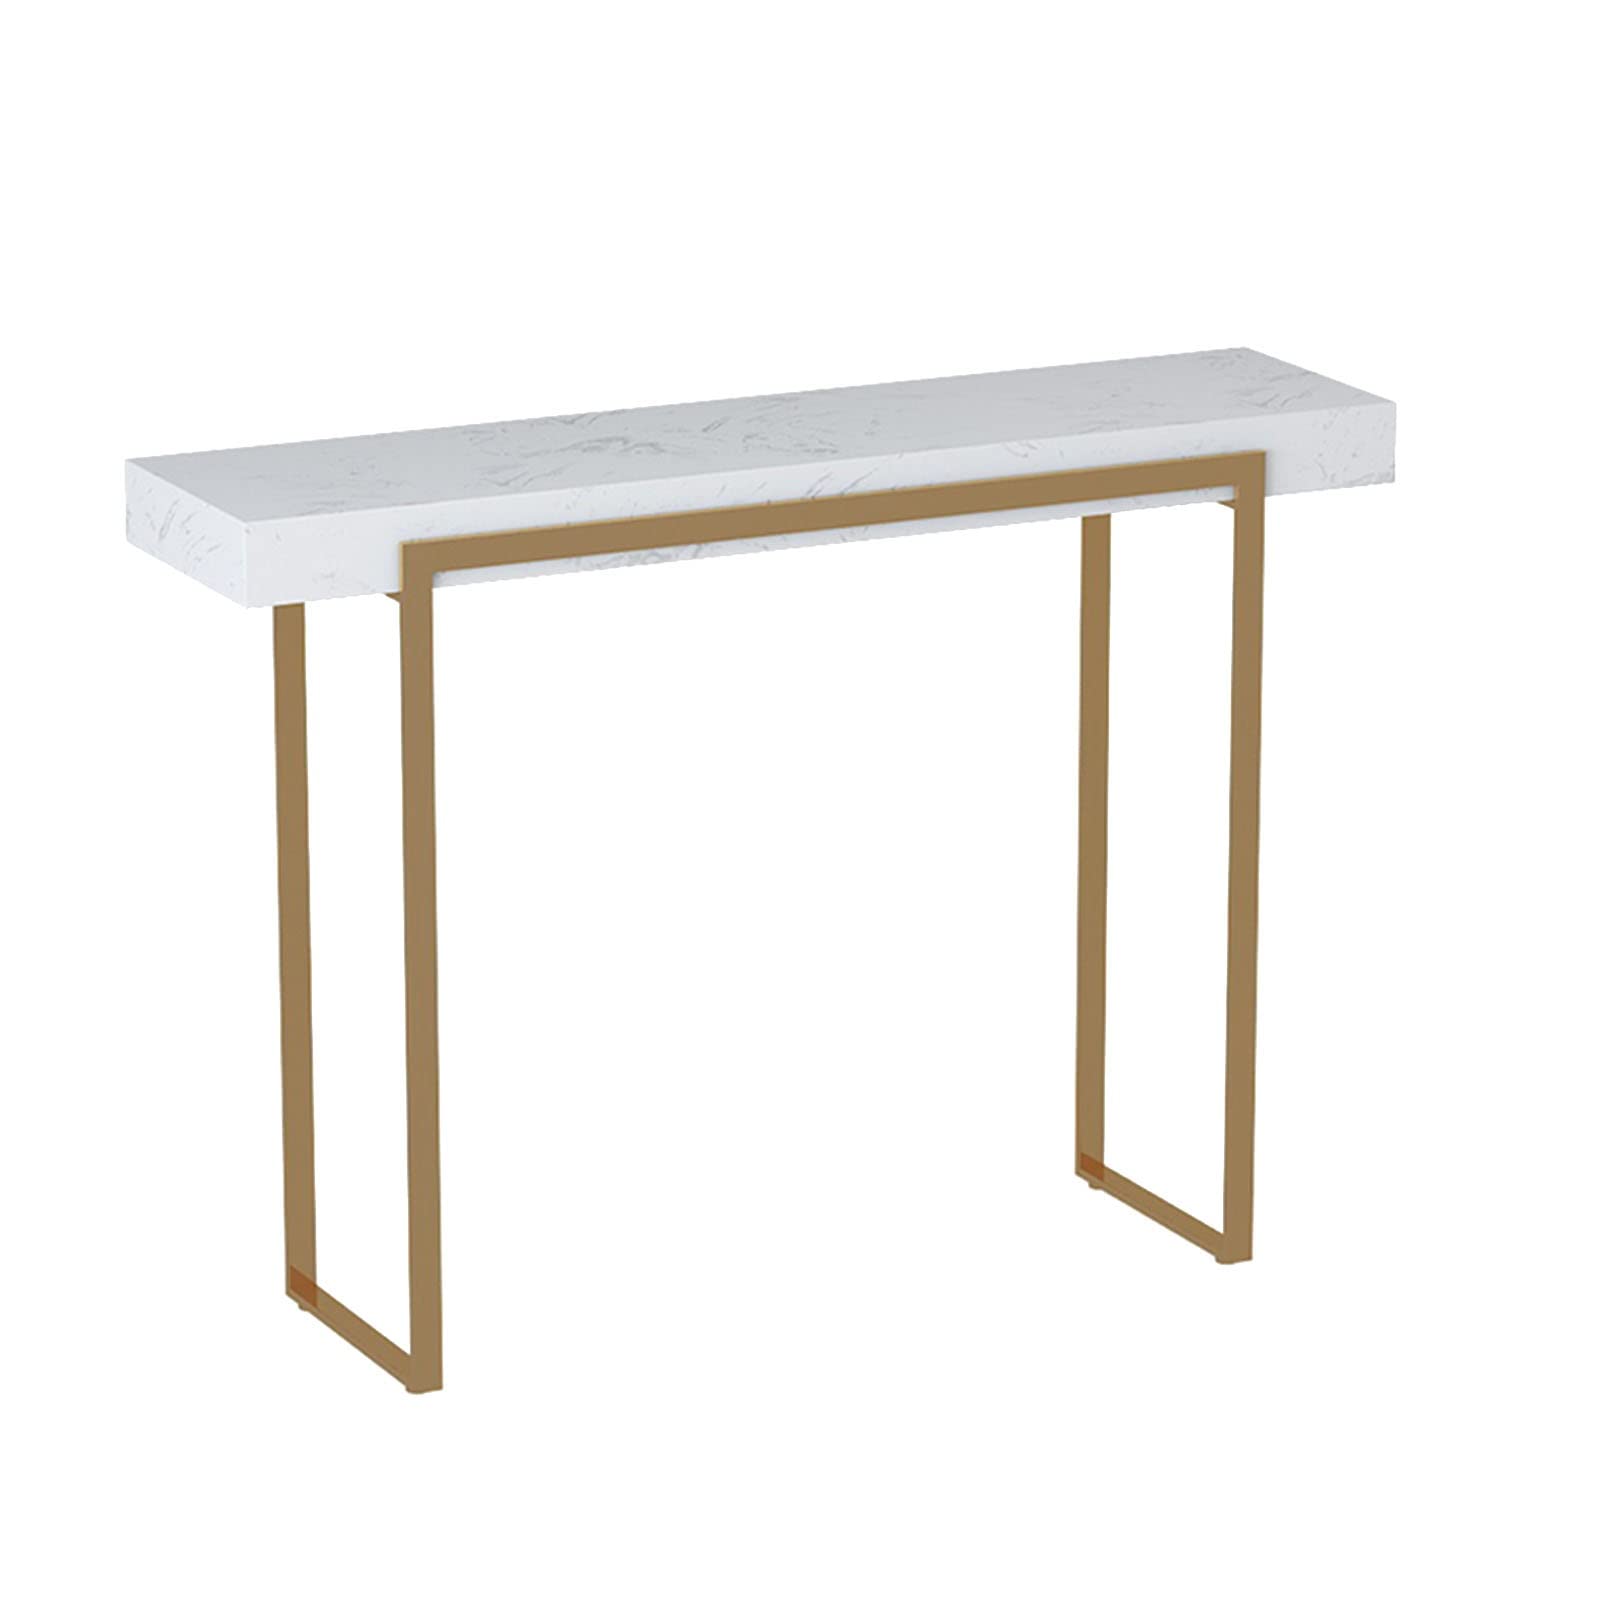 RIEJIN Console Table Household Console Table, Marble Entryway Table, Sofa Table with Metal Frame, for Hallway, Living Room, Hall